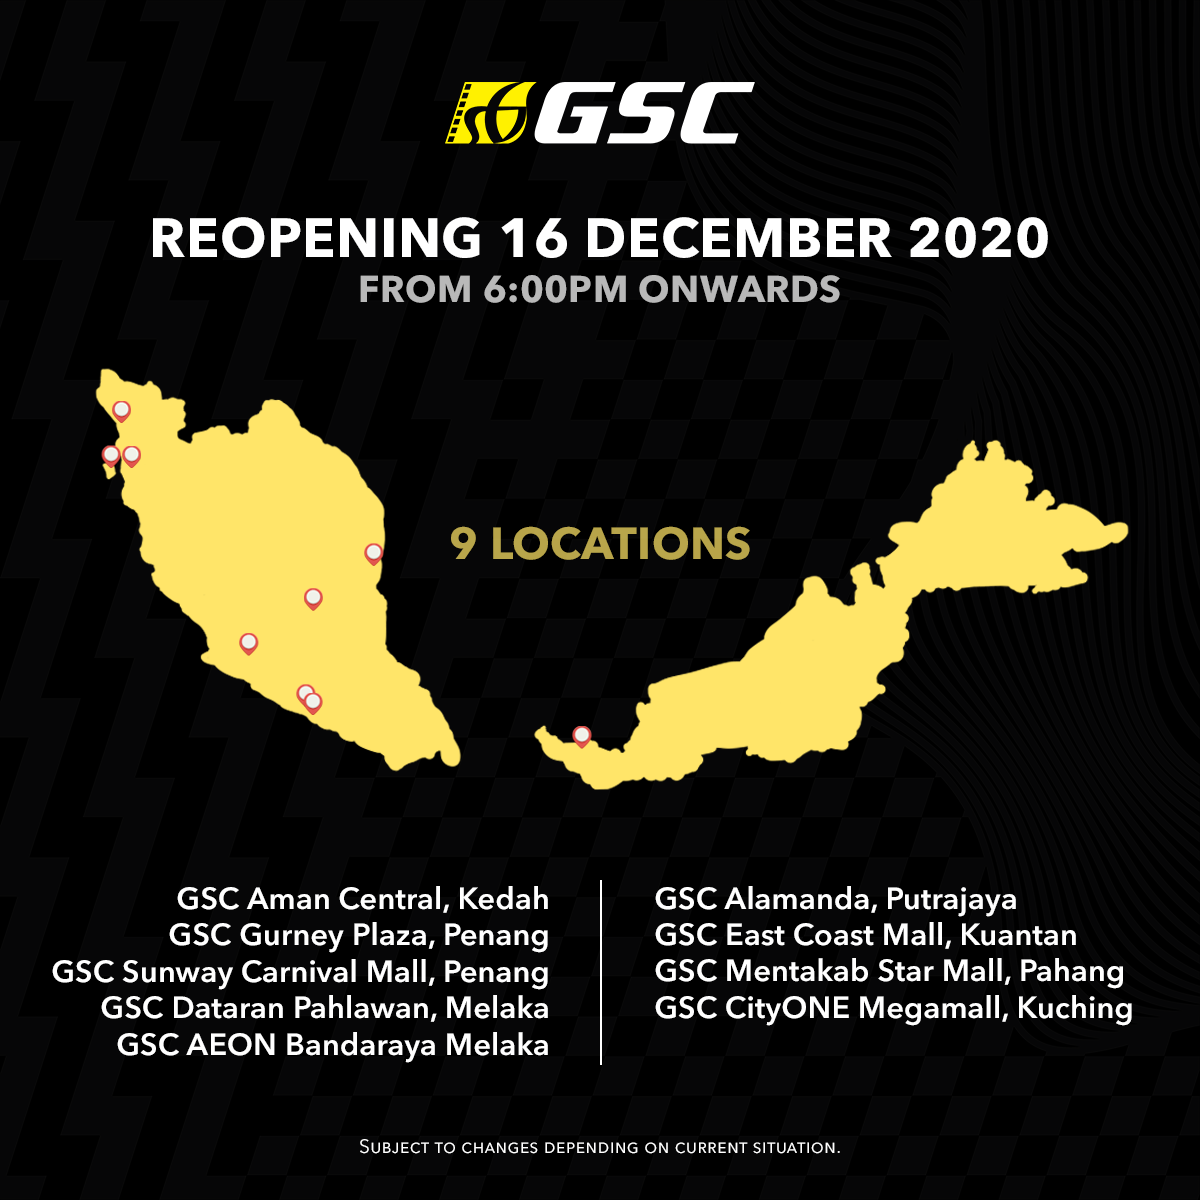 gsc cinemas reopening locations poster